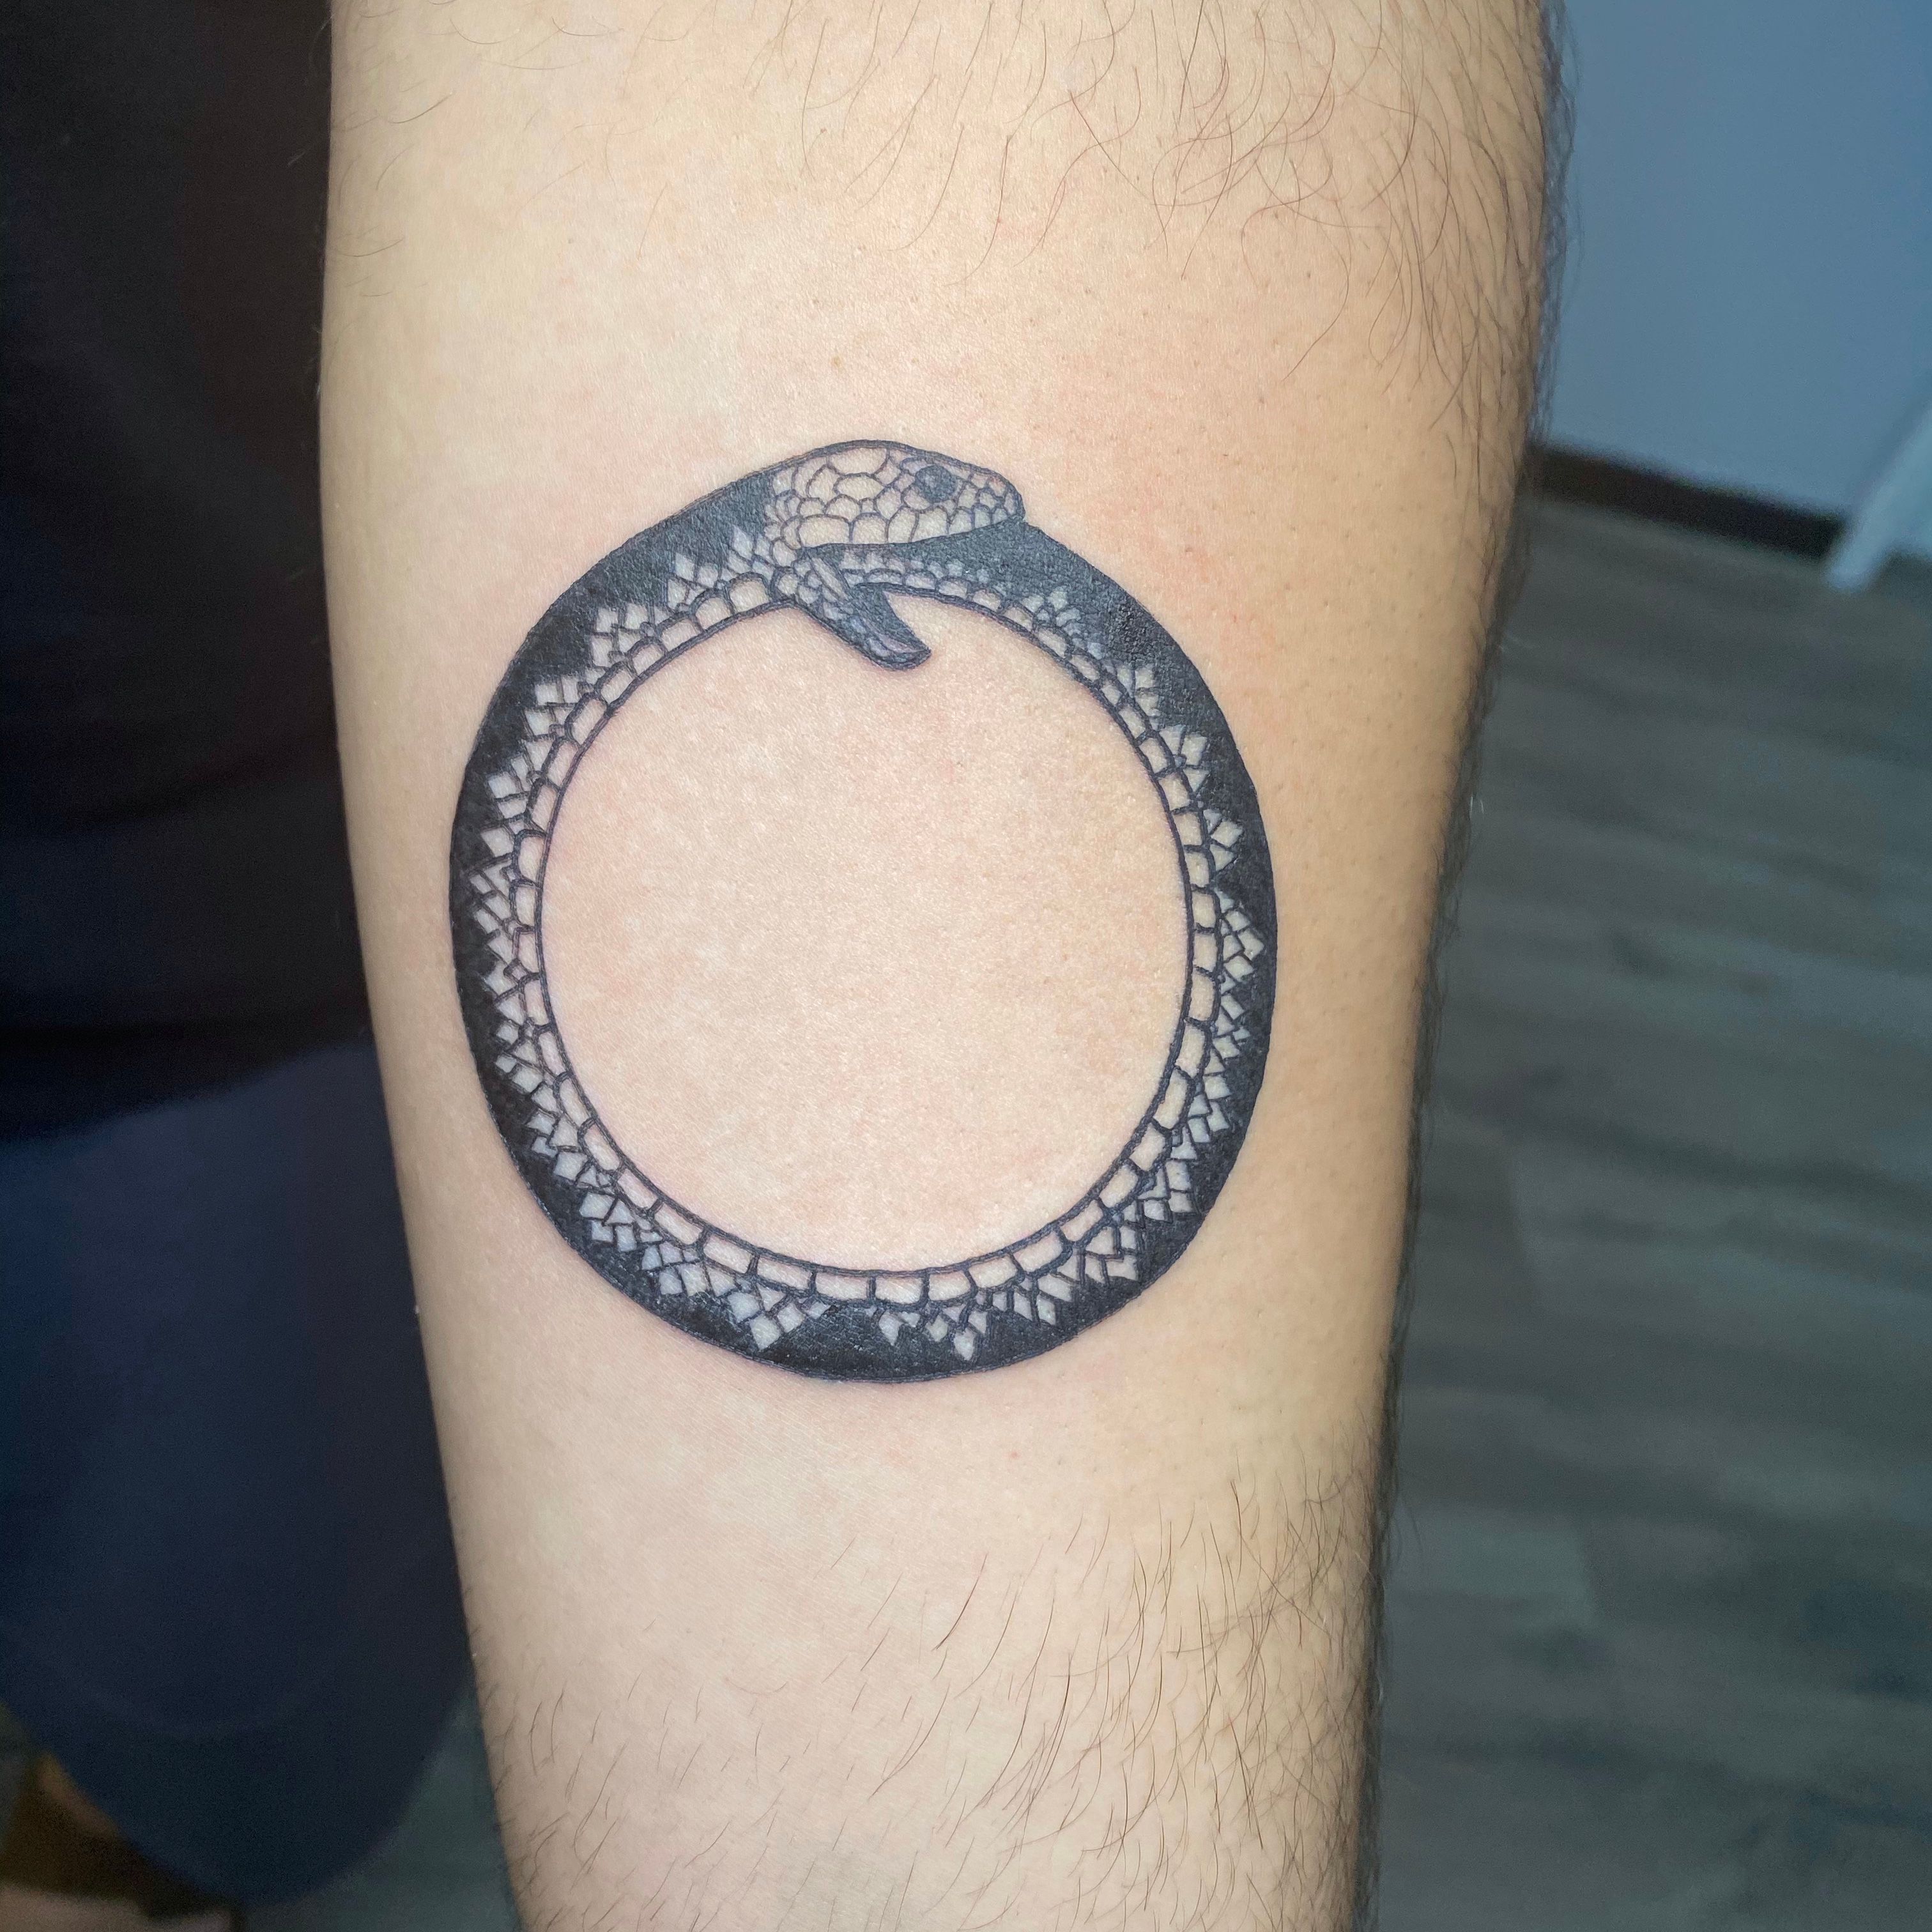 Dotwork ouroboros tattoo hand poked on the inner